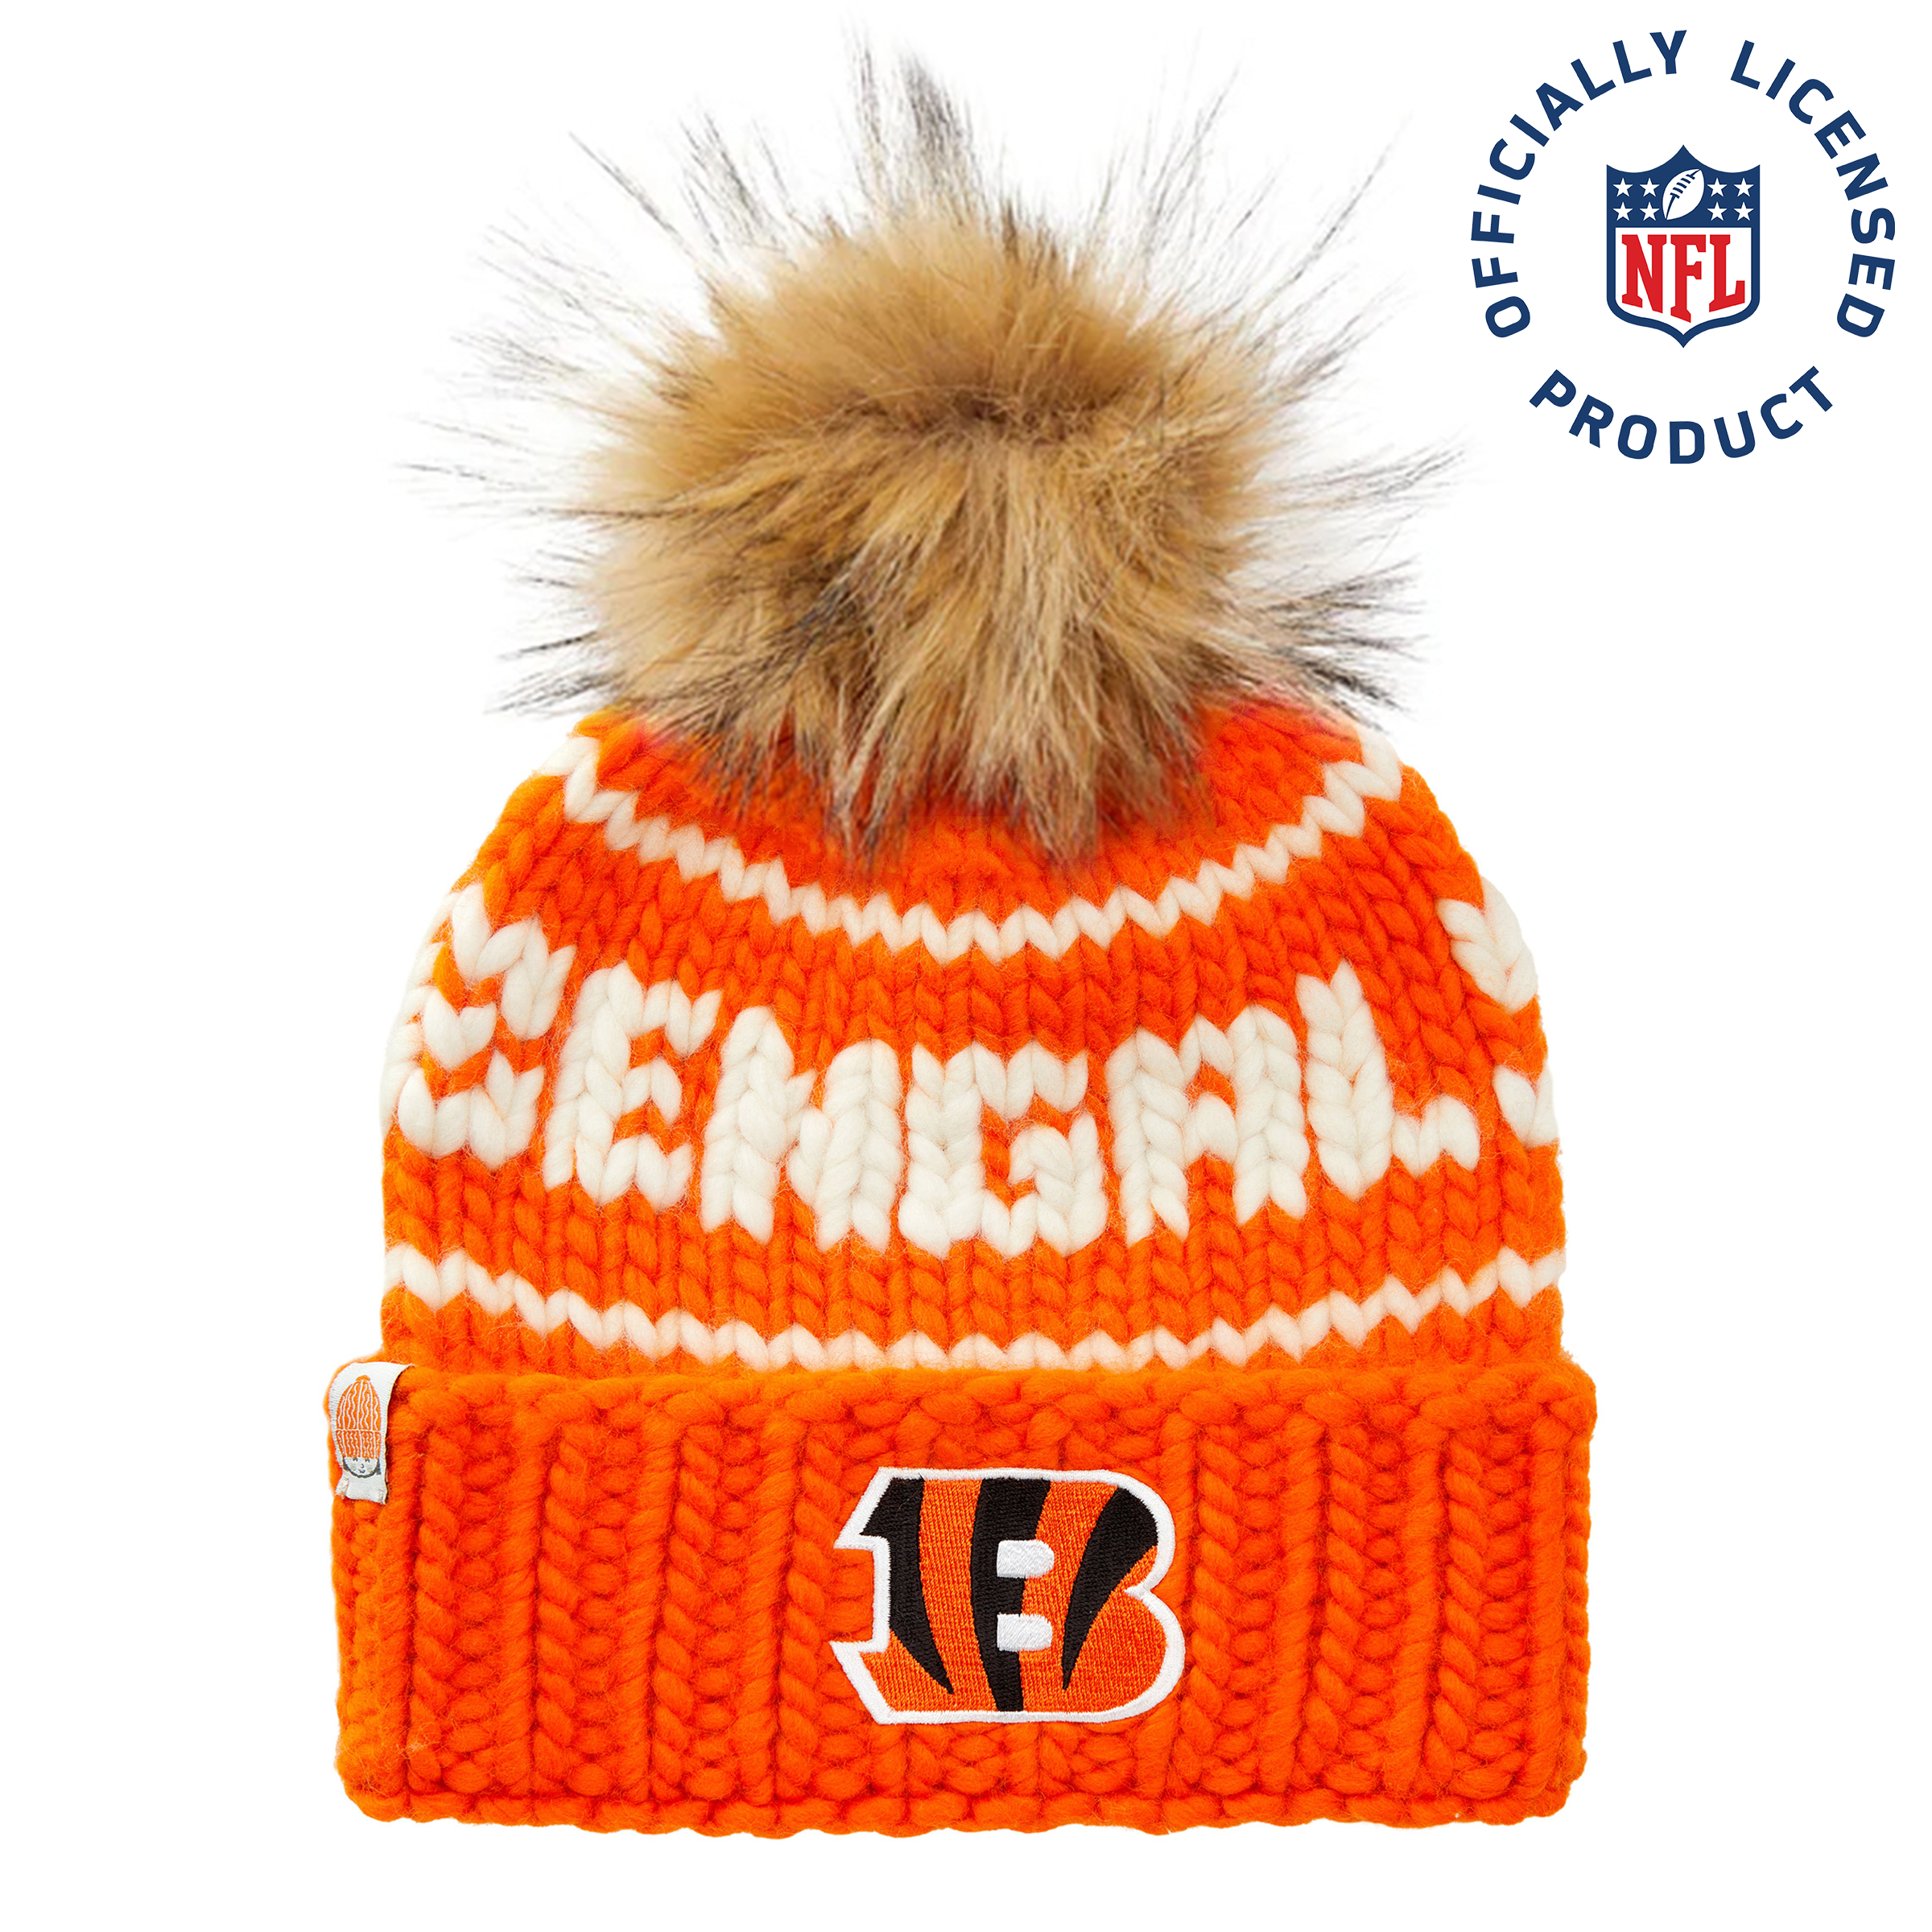 The Bengals NFL Beanie with Faux Fur Pom